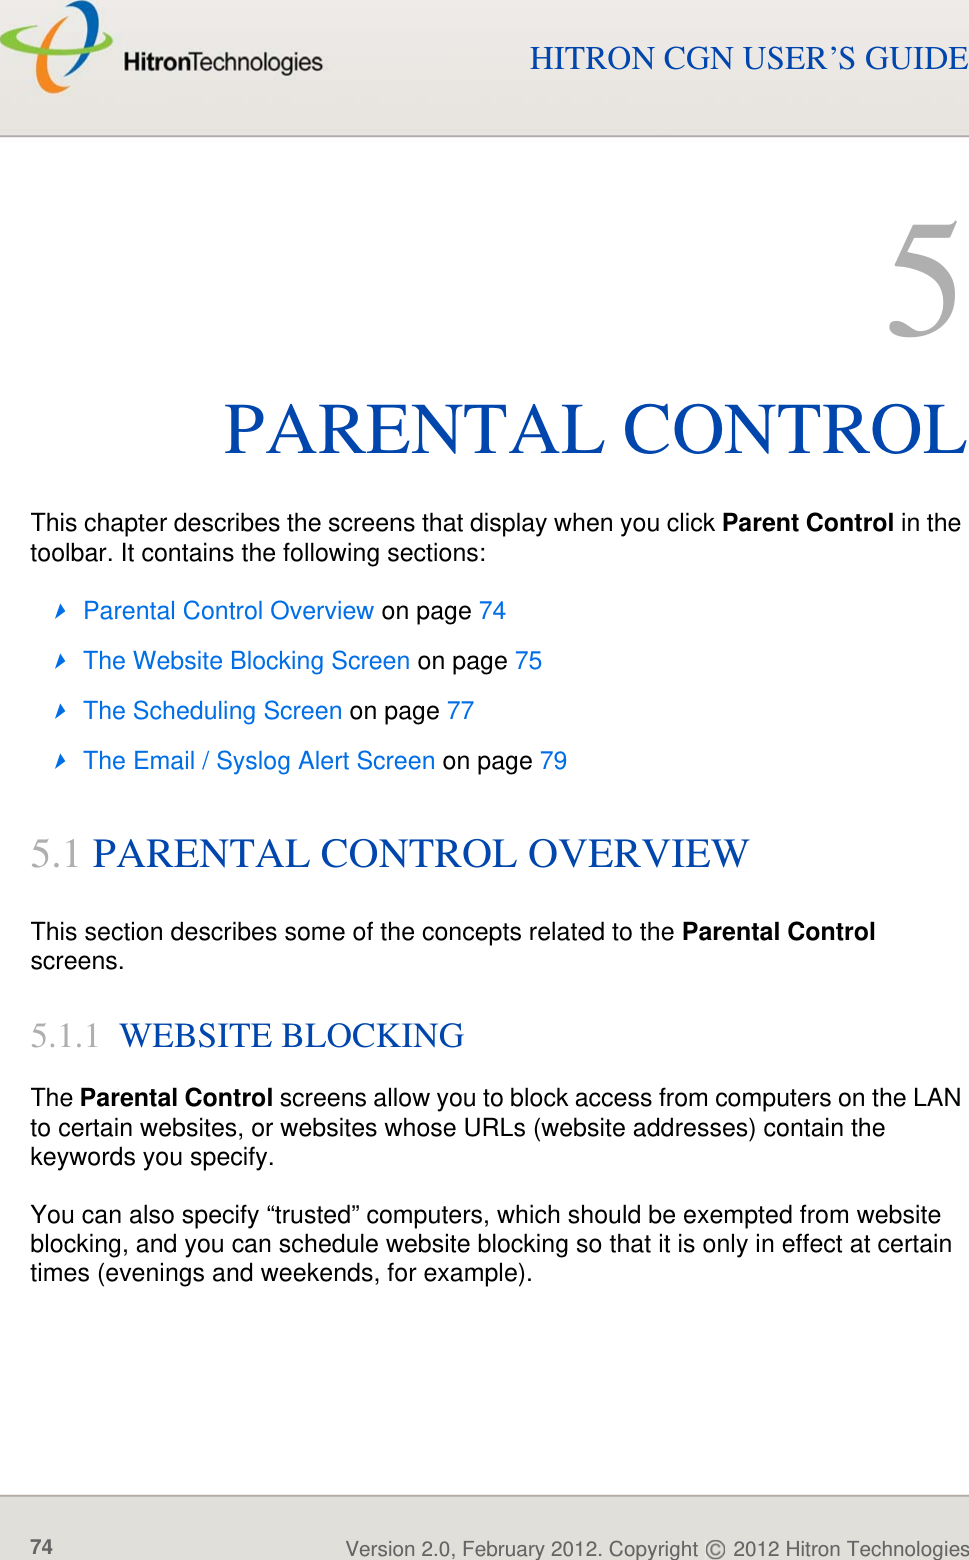 PARENTAL CONTROLVersion 2.0, February 2012. Copyright   2012 Hitron Technologies74HITRON CGN USER’S GUIDE5PARENTAL CONTROLThis chapter describes the screens that display when you click Parent Control in the toolbar. It contains the following sections:Parental Control Overview on page 74The Website Blocking Screen on page 75The Scheduling Screen on page 77The Email / Syslog Alert Screen on page 795.1 PARENTAL CONTROL OVERVIEWThis section describes some of the concepts related to the Parental Control screens.5.1.1  WEBSITE BLOCKINGThe Parental Control screens allow you to block access from computers on the LAN to certain websites, or websites whose URLs (website addresses) contain the keywords you specify.You can also specify “trusted” computers, which should be exempted from website blocking, and you can schedule website blocking so that it is only in effect at certain times (evenings and weekends, for example).